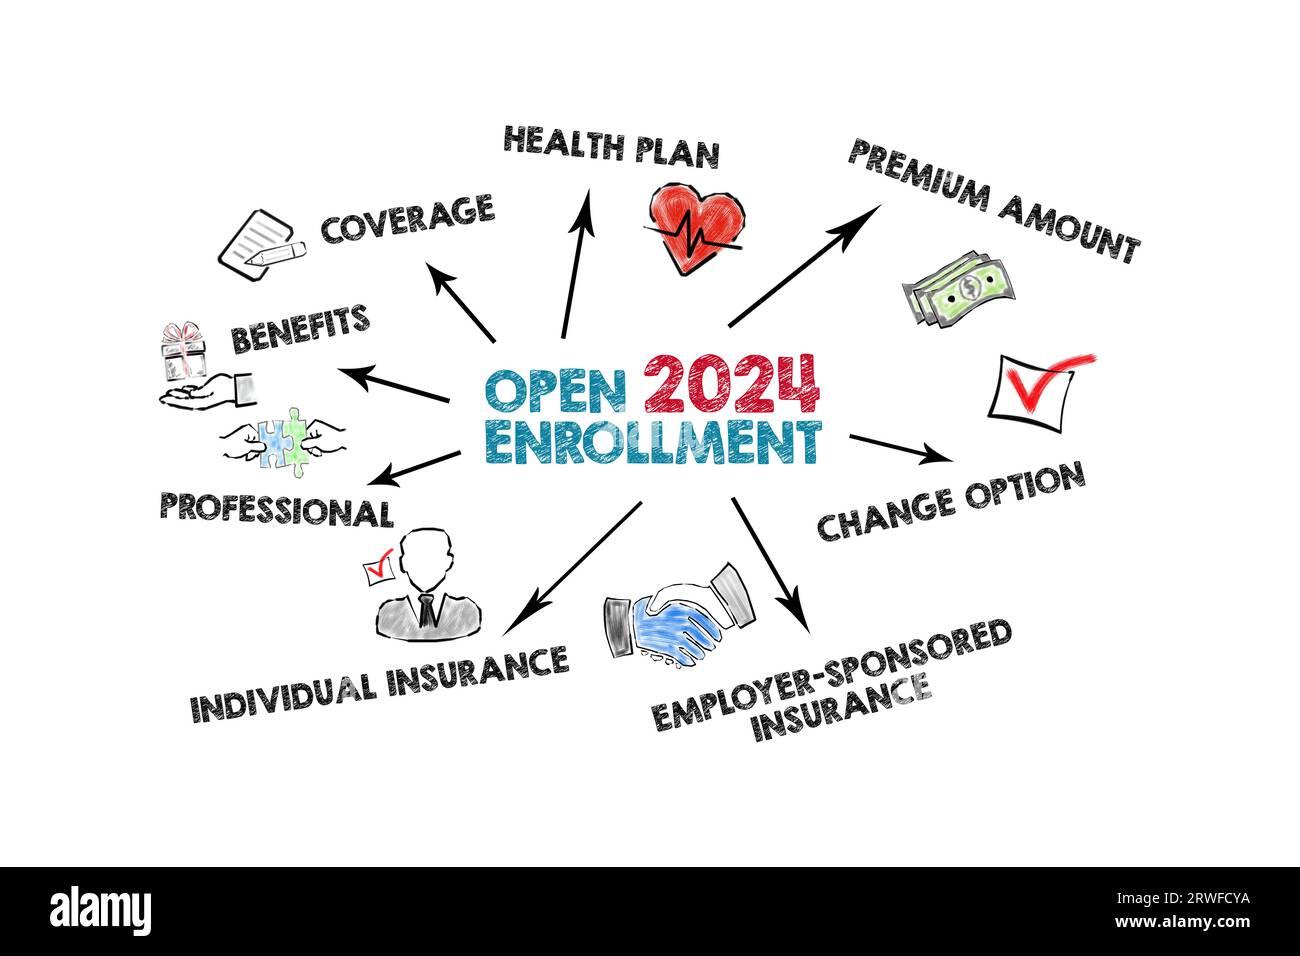 Open Enrollment 2024. Illustration with keywords and icons on a white